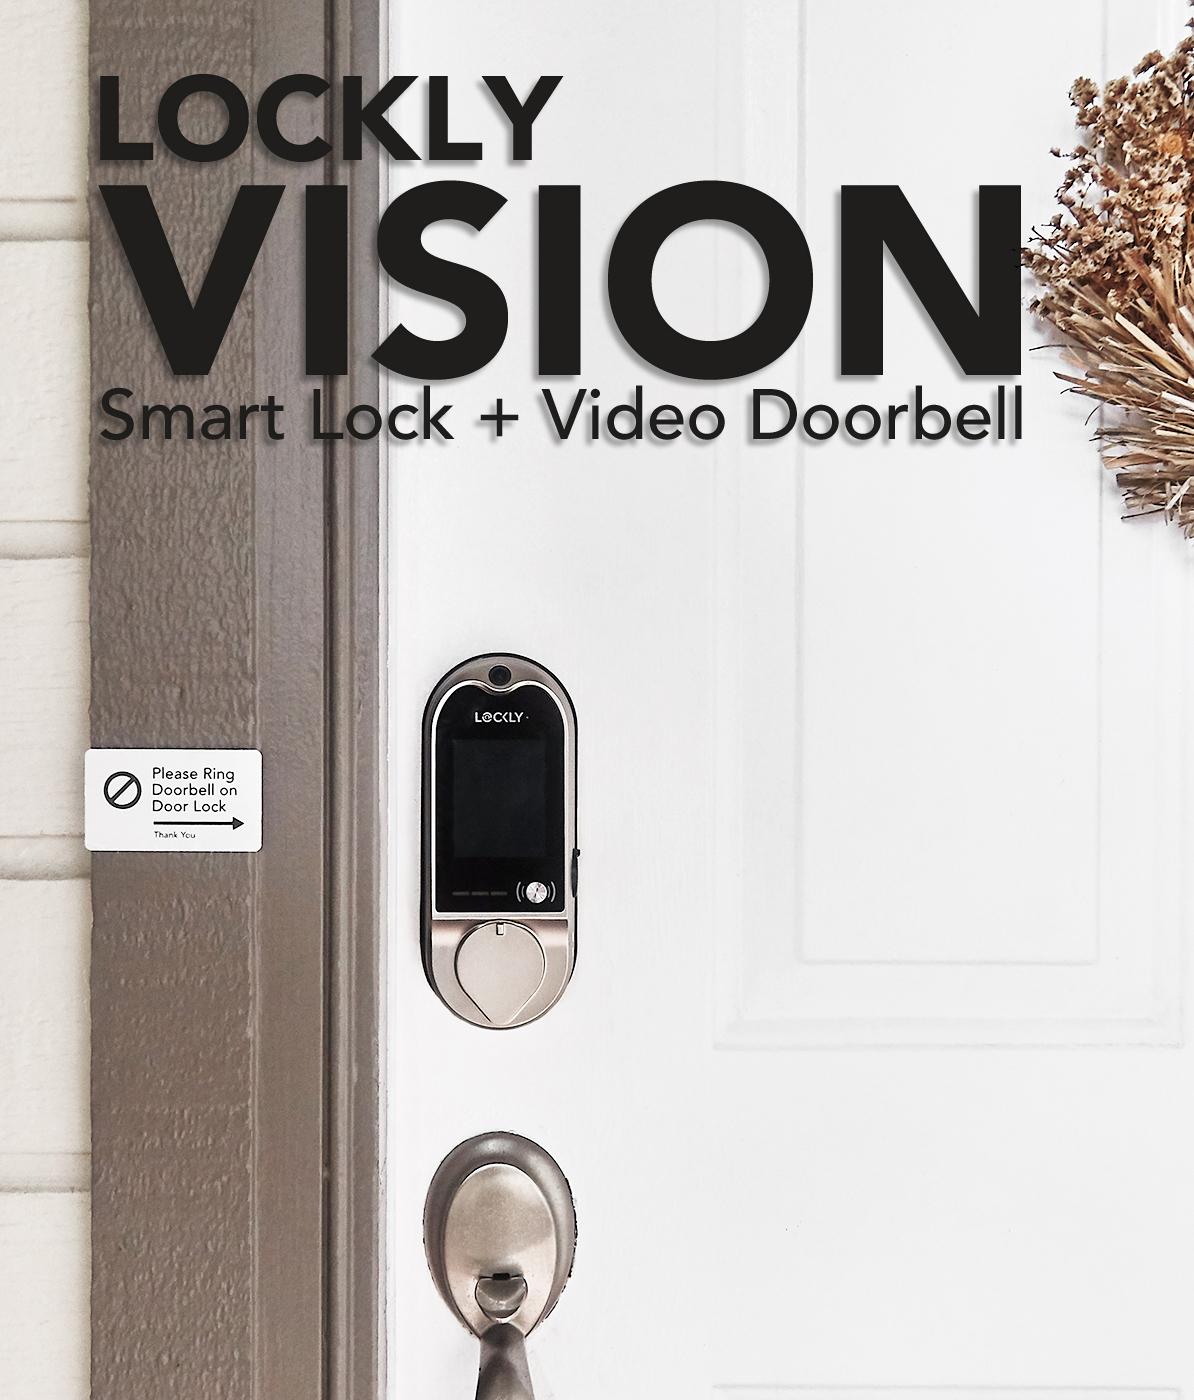 Lockly Vision review: A smart door lock and doorbell in one